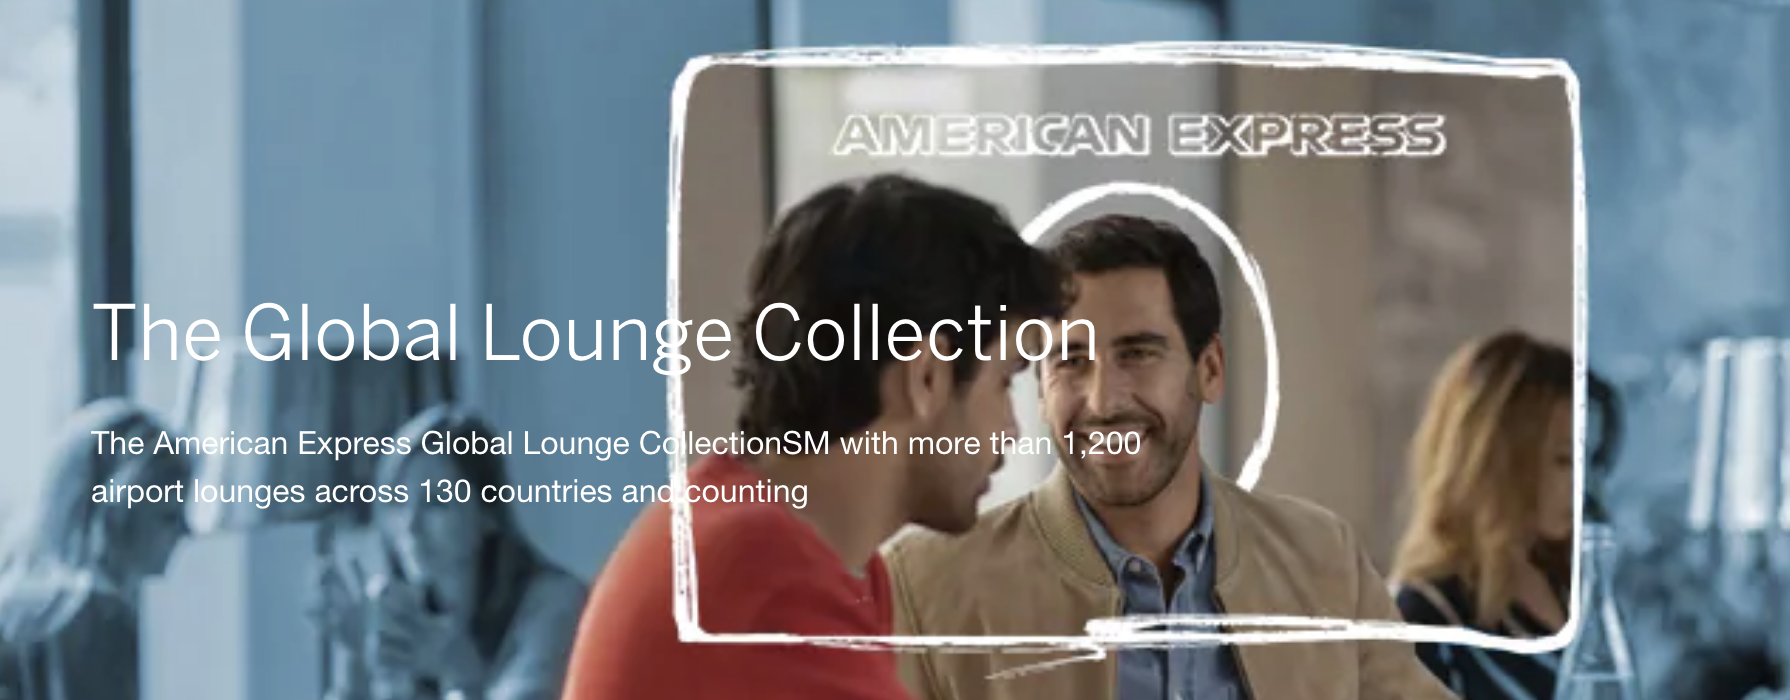 amex global lounge collection